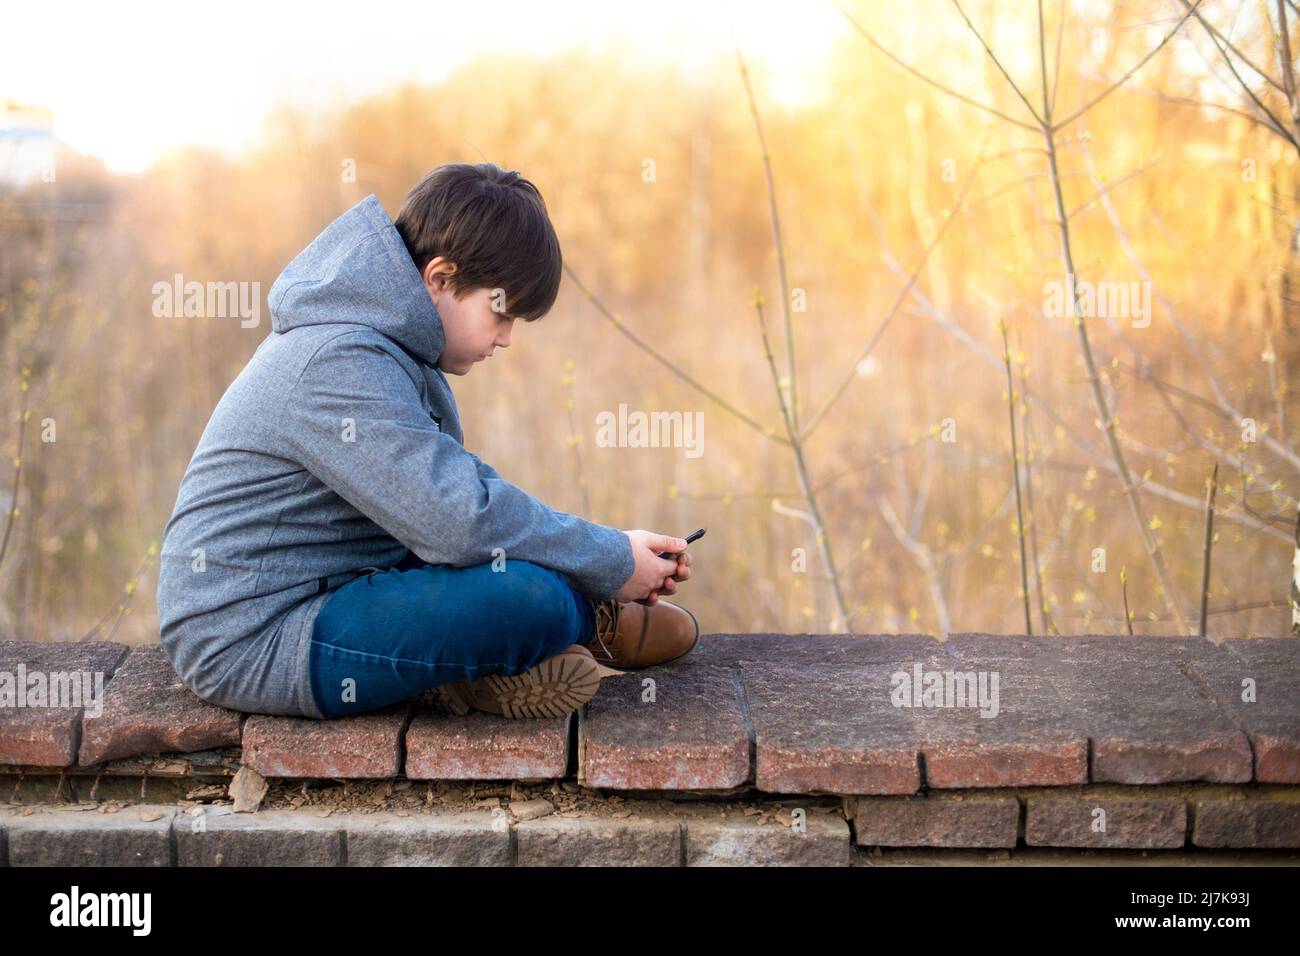 A schoolboy boy uses a mobile phone in his hands in nature in the city in the spring at sunset. Free time. Stock Photo